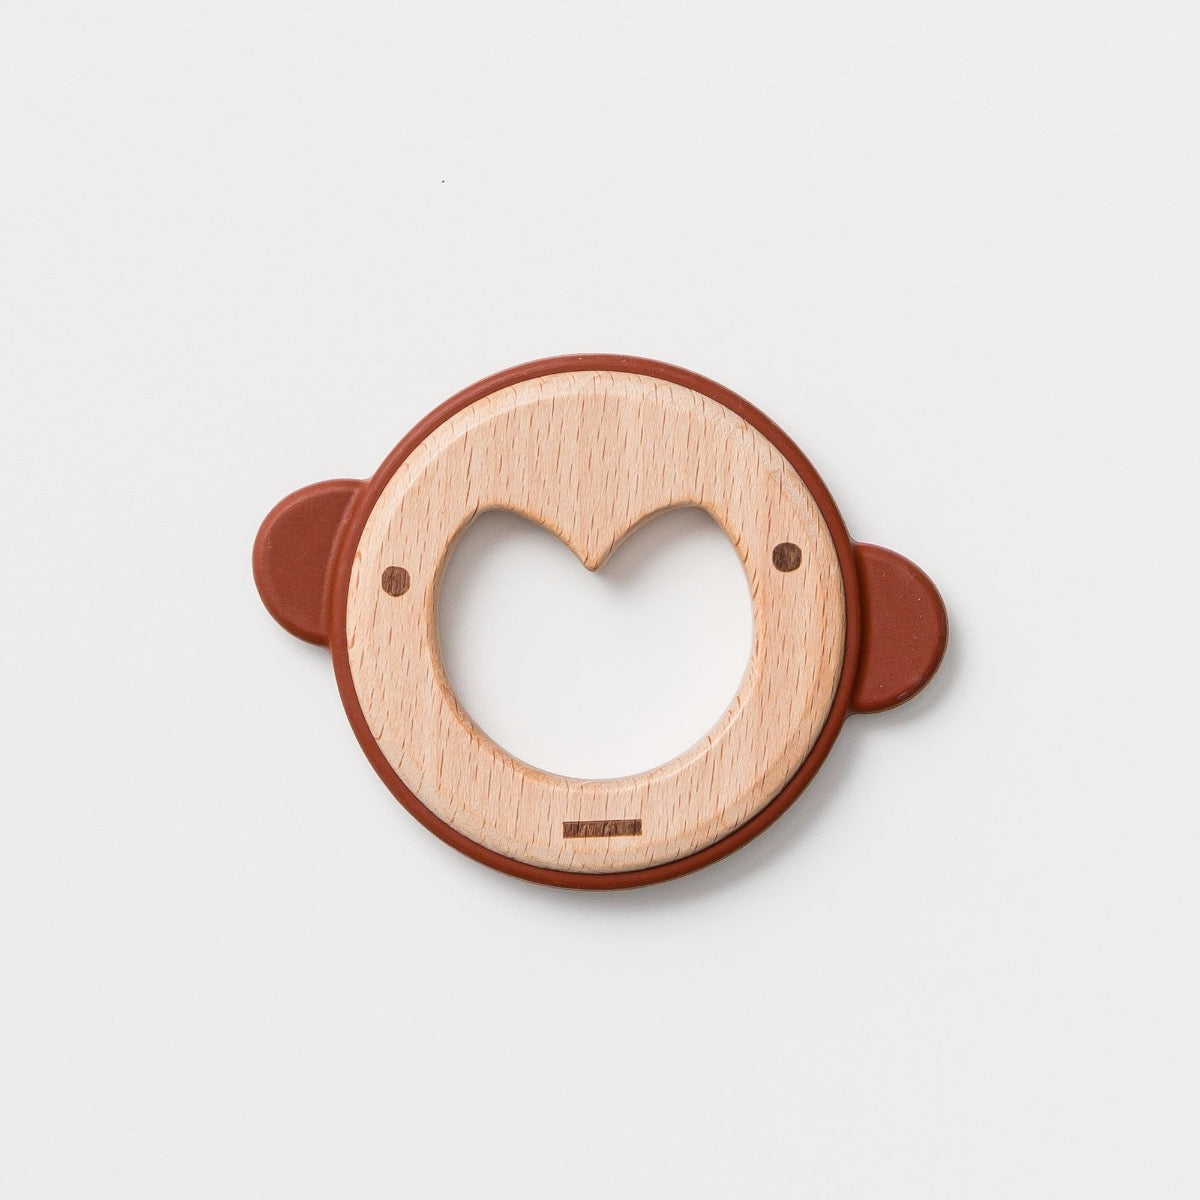 Over The Dandelions-Mykah the Monkey Teether Wood + Silicone